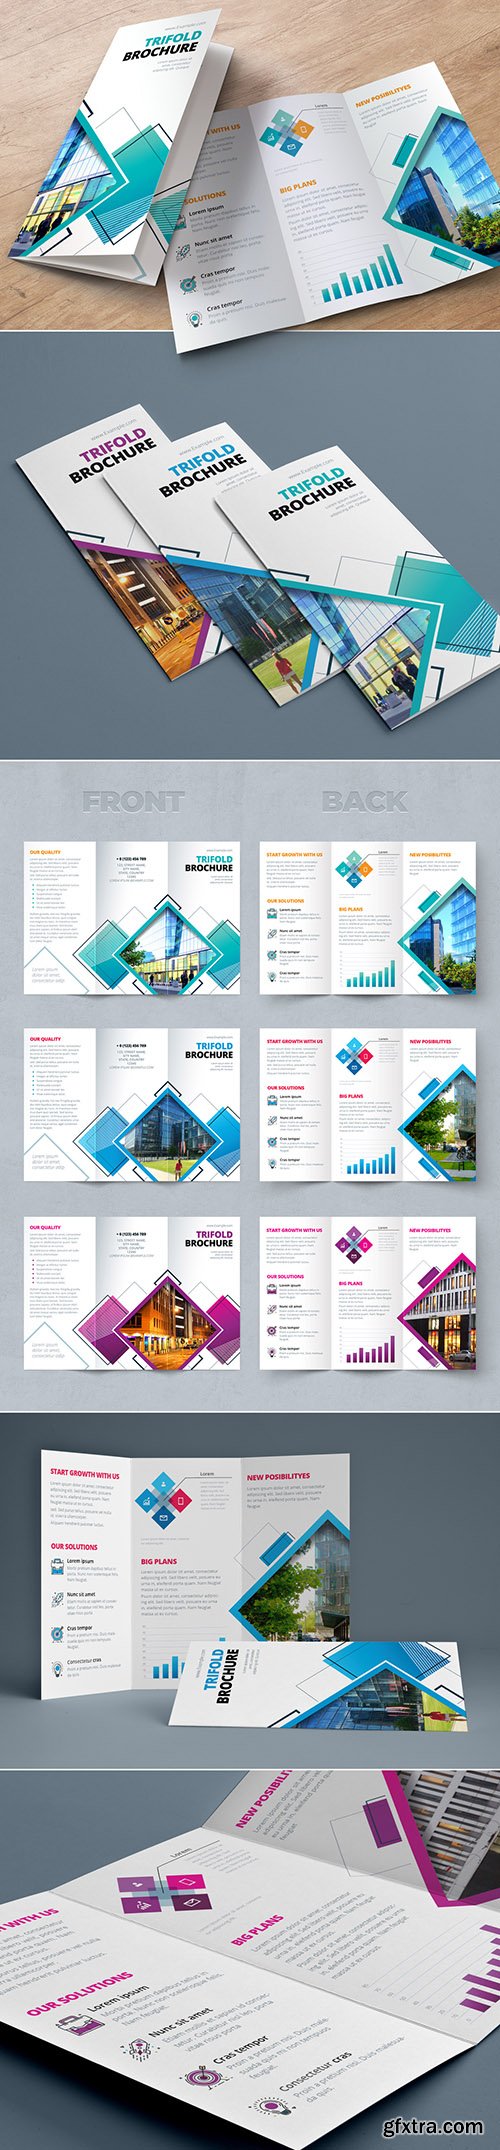 Trifold Brochure Layout with Geometric Elements